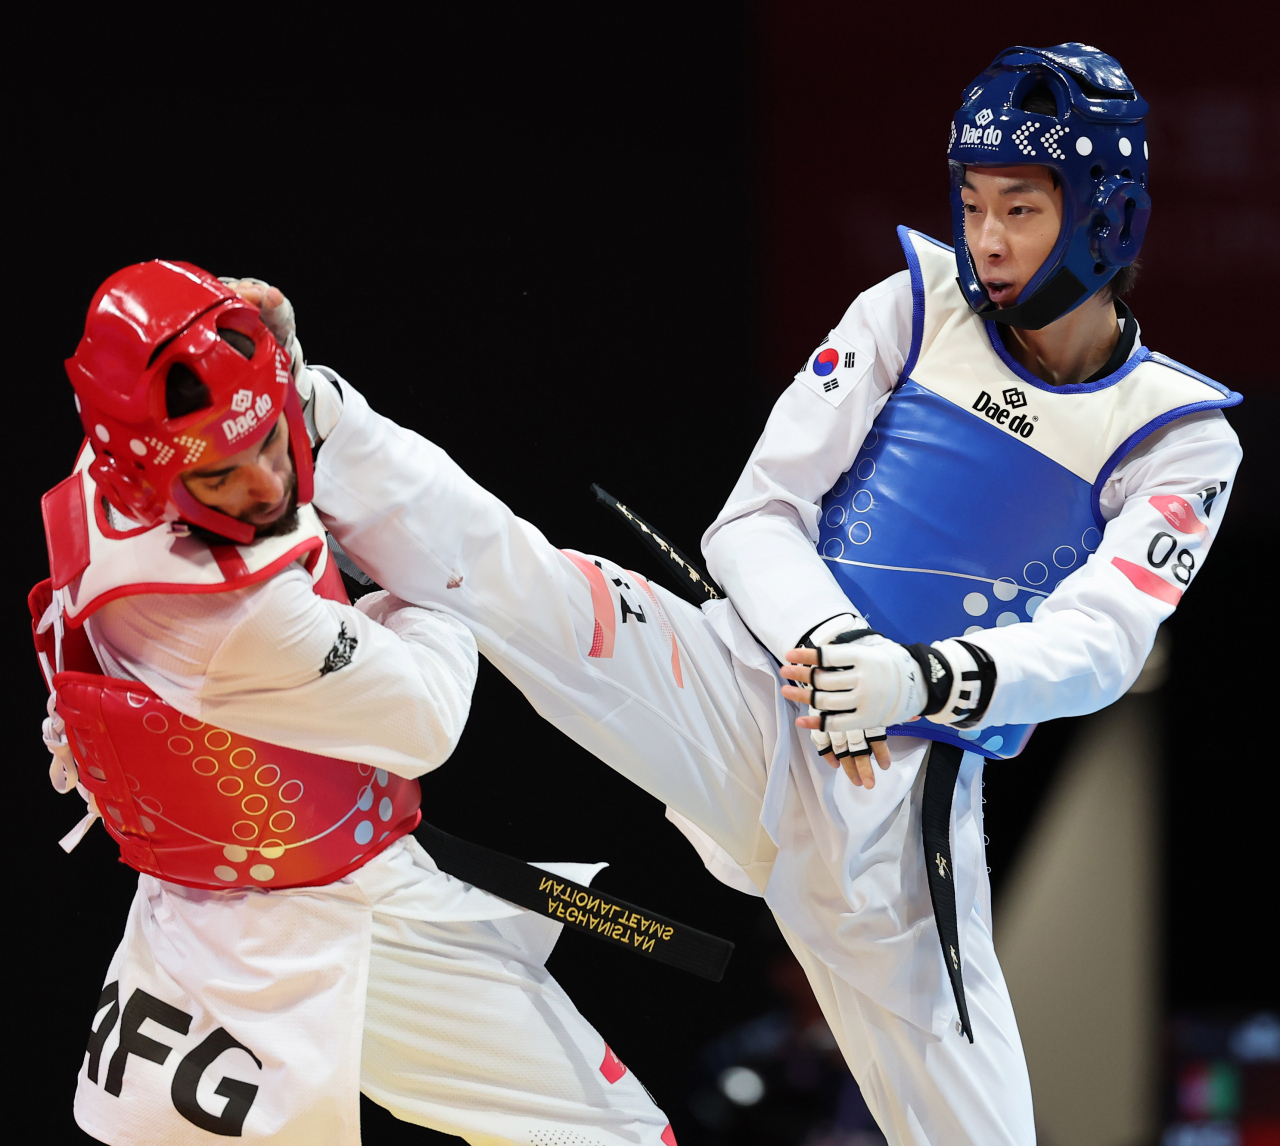 South Korea's Jang Jun (right) competes in the men's -58kg taekwondo at Lin'an Sports Culture & Exhibition Centre in Hangzhou, China, during the 19th Asian Games on Monday. (Yonhap)